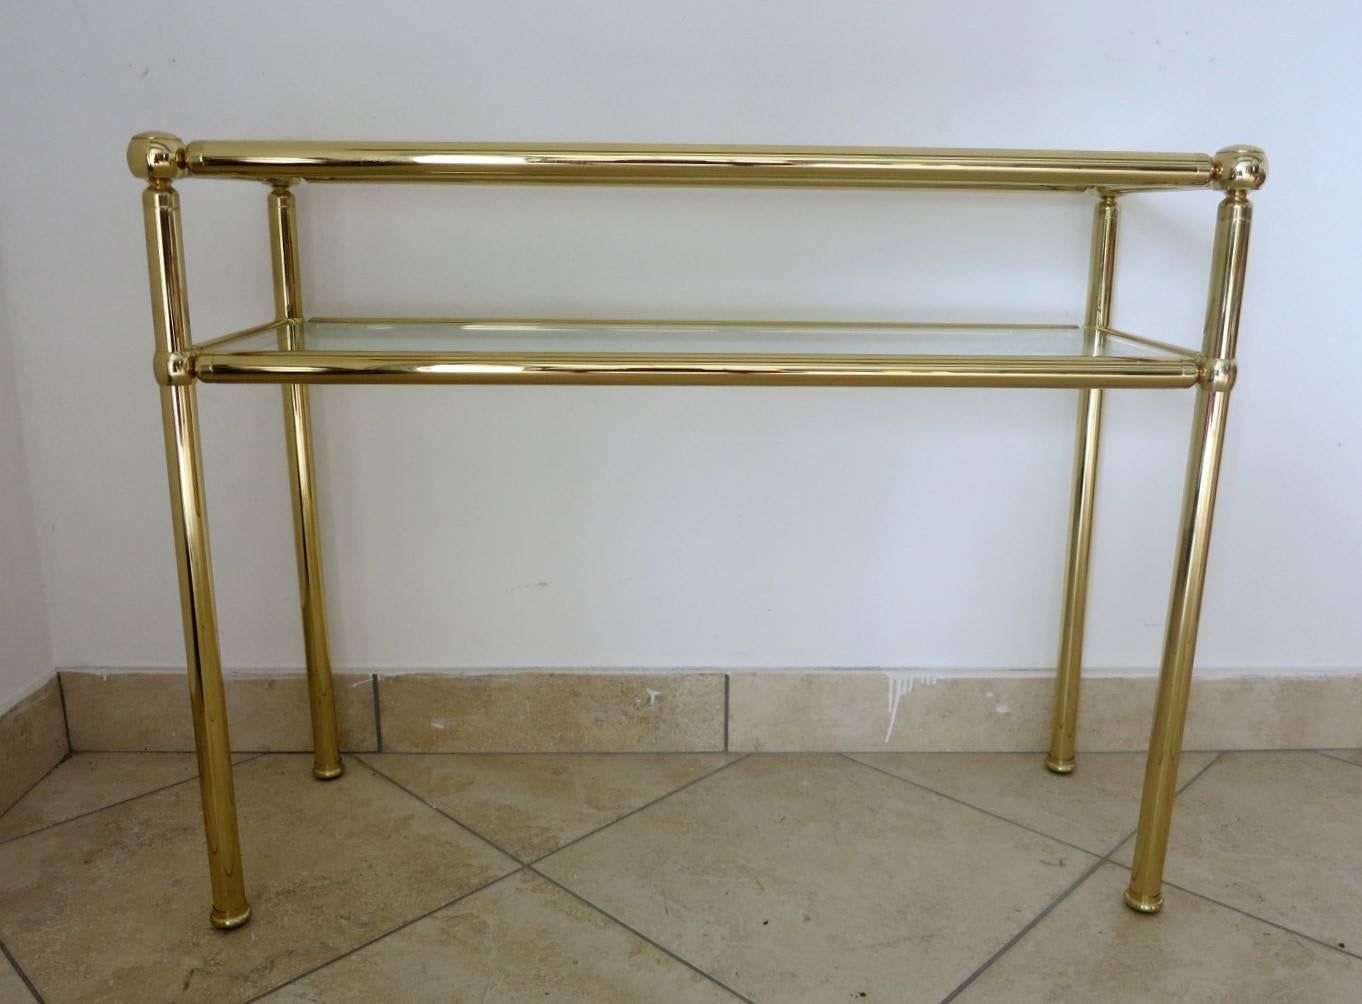 Italian midcentury brass console table, made in Italy in the 1950s
Size: Length 38.5 inches, width 14 inches, height 30 inches
3 in stock in Palm Springs ON FINAL CLEARANCE SALE for $1,199 each!!!
Order Reference #: FABIOLTD F2